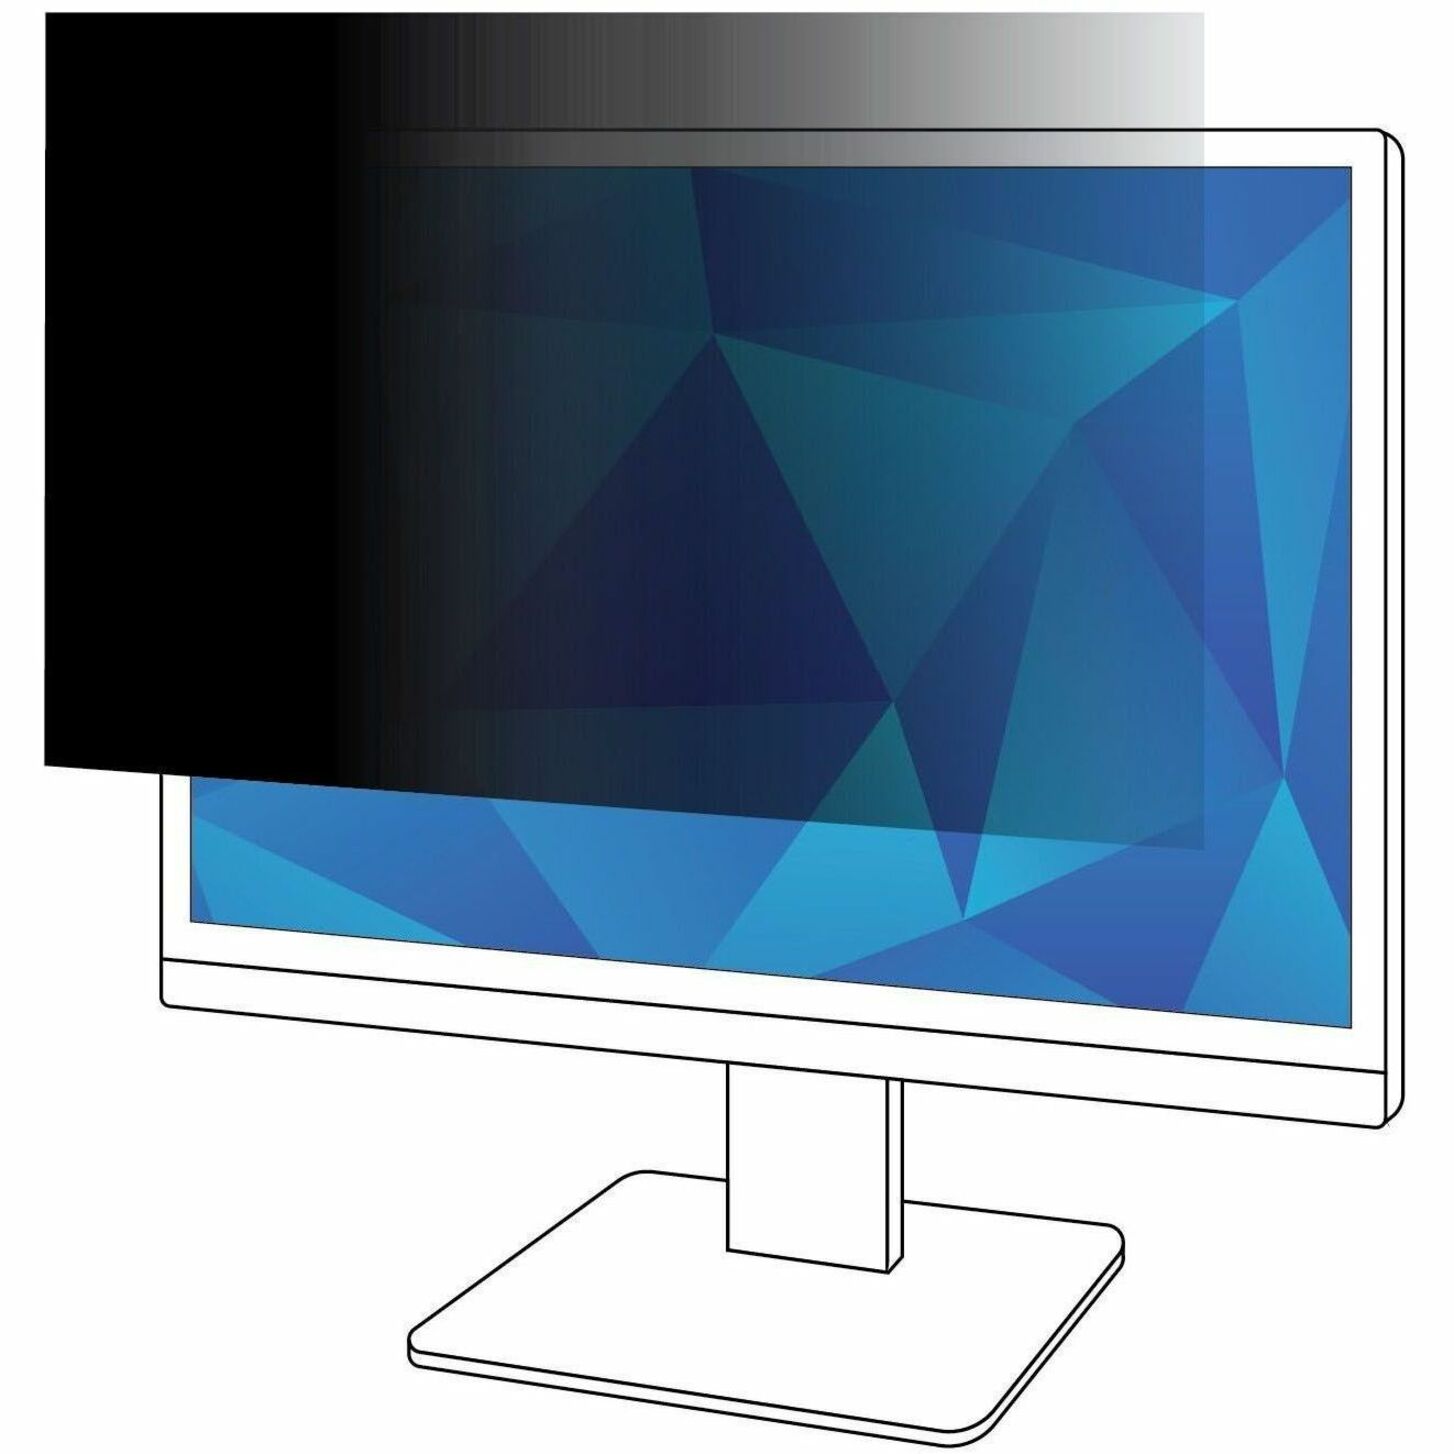 3M PF195W9B Privacy Filter for 19.5" Wide-screen Monitors, 16:9, Easy to Apply, Easy Clean, Limited Viewing Angle, Matte Black